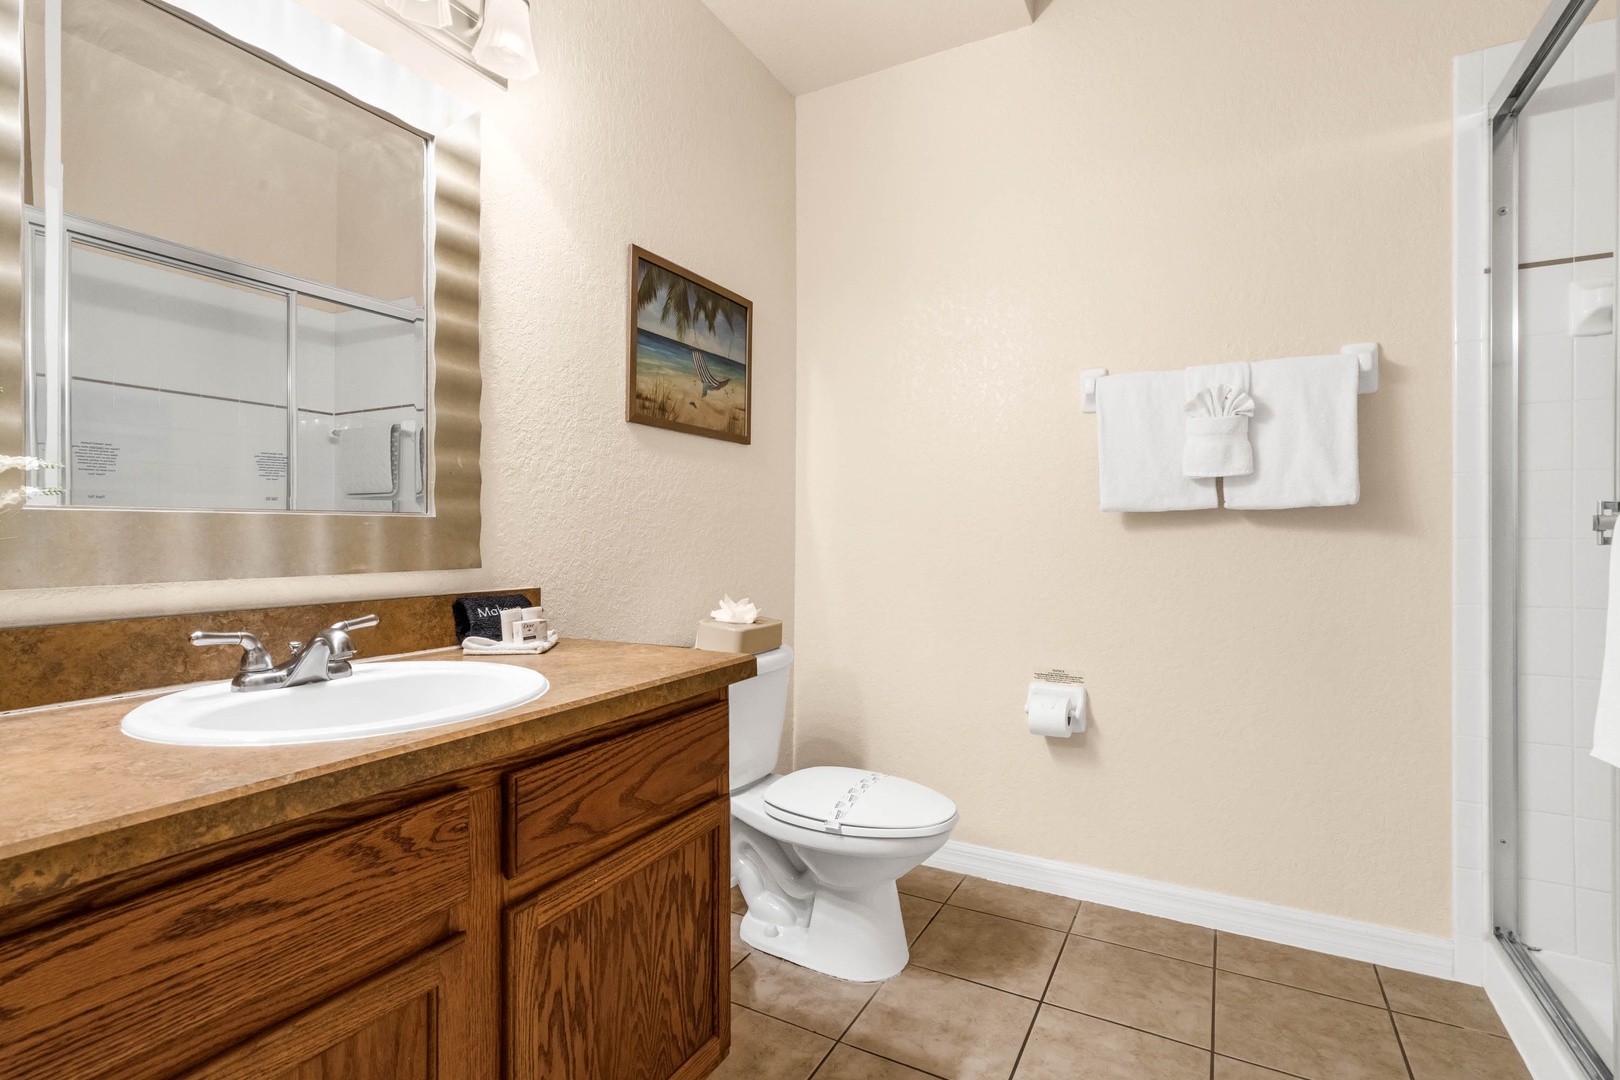 Find a spacious single vanity and shower in the shared bathroom